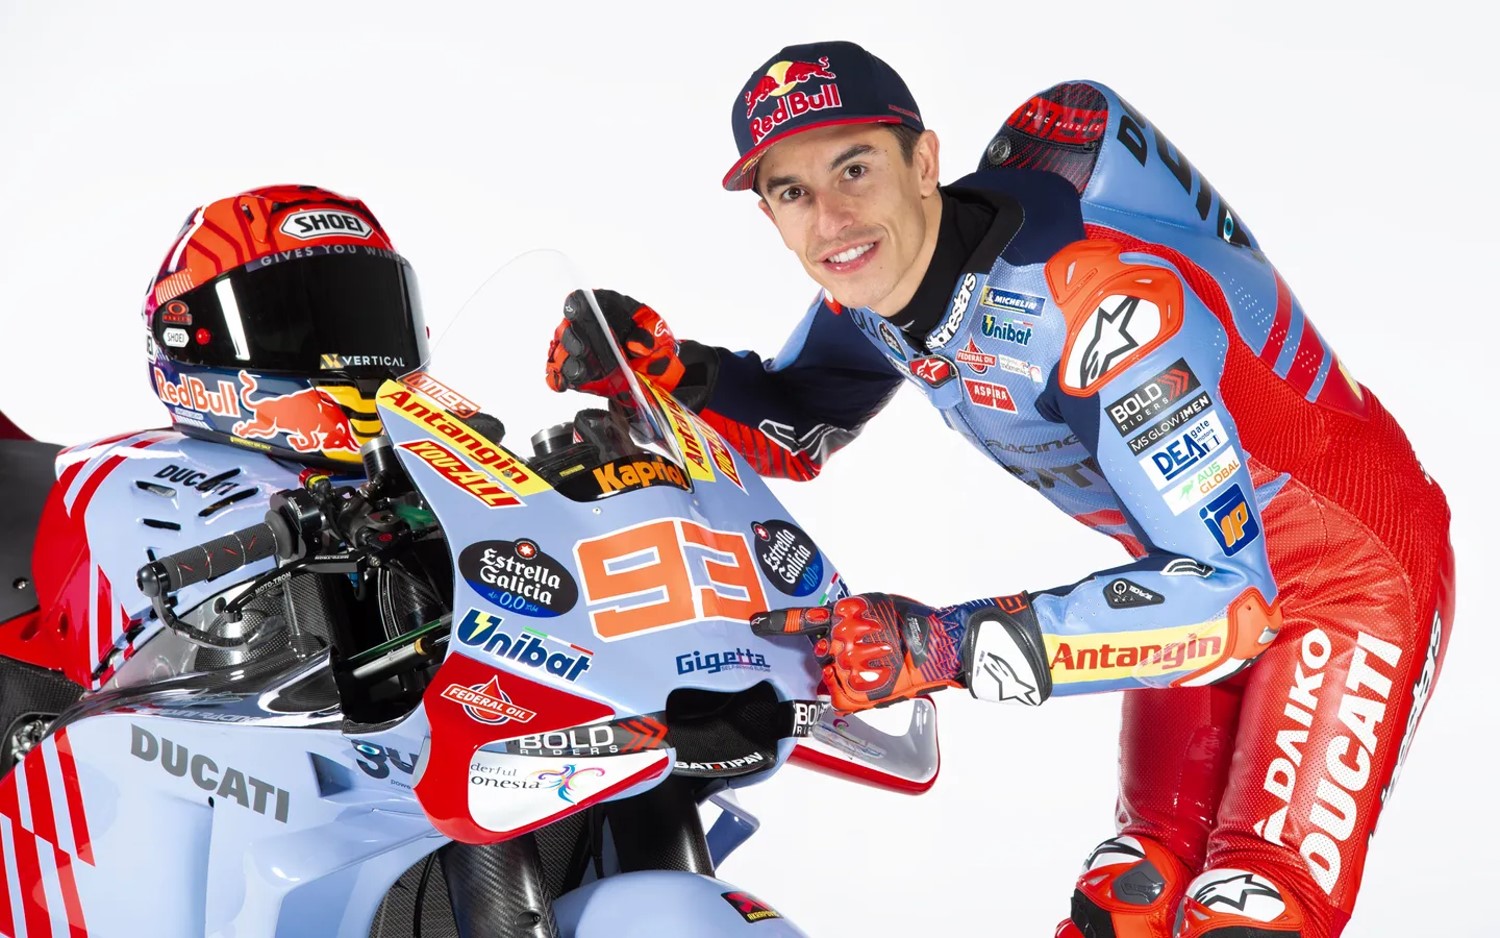 Marc Marquez poses with his Gresini Ducati Desmosedici with #93 on the fairing. Image: Supplied by Gresini Racing